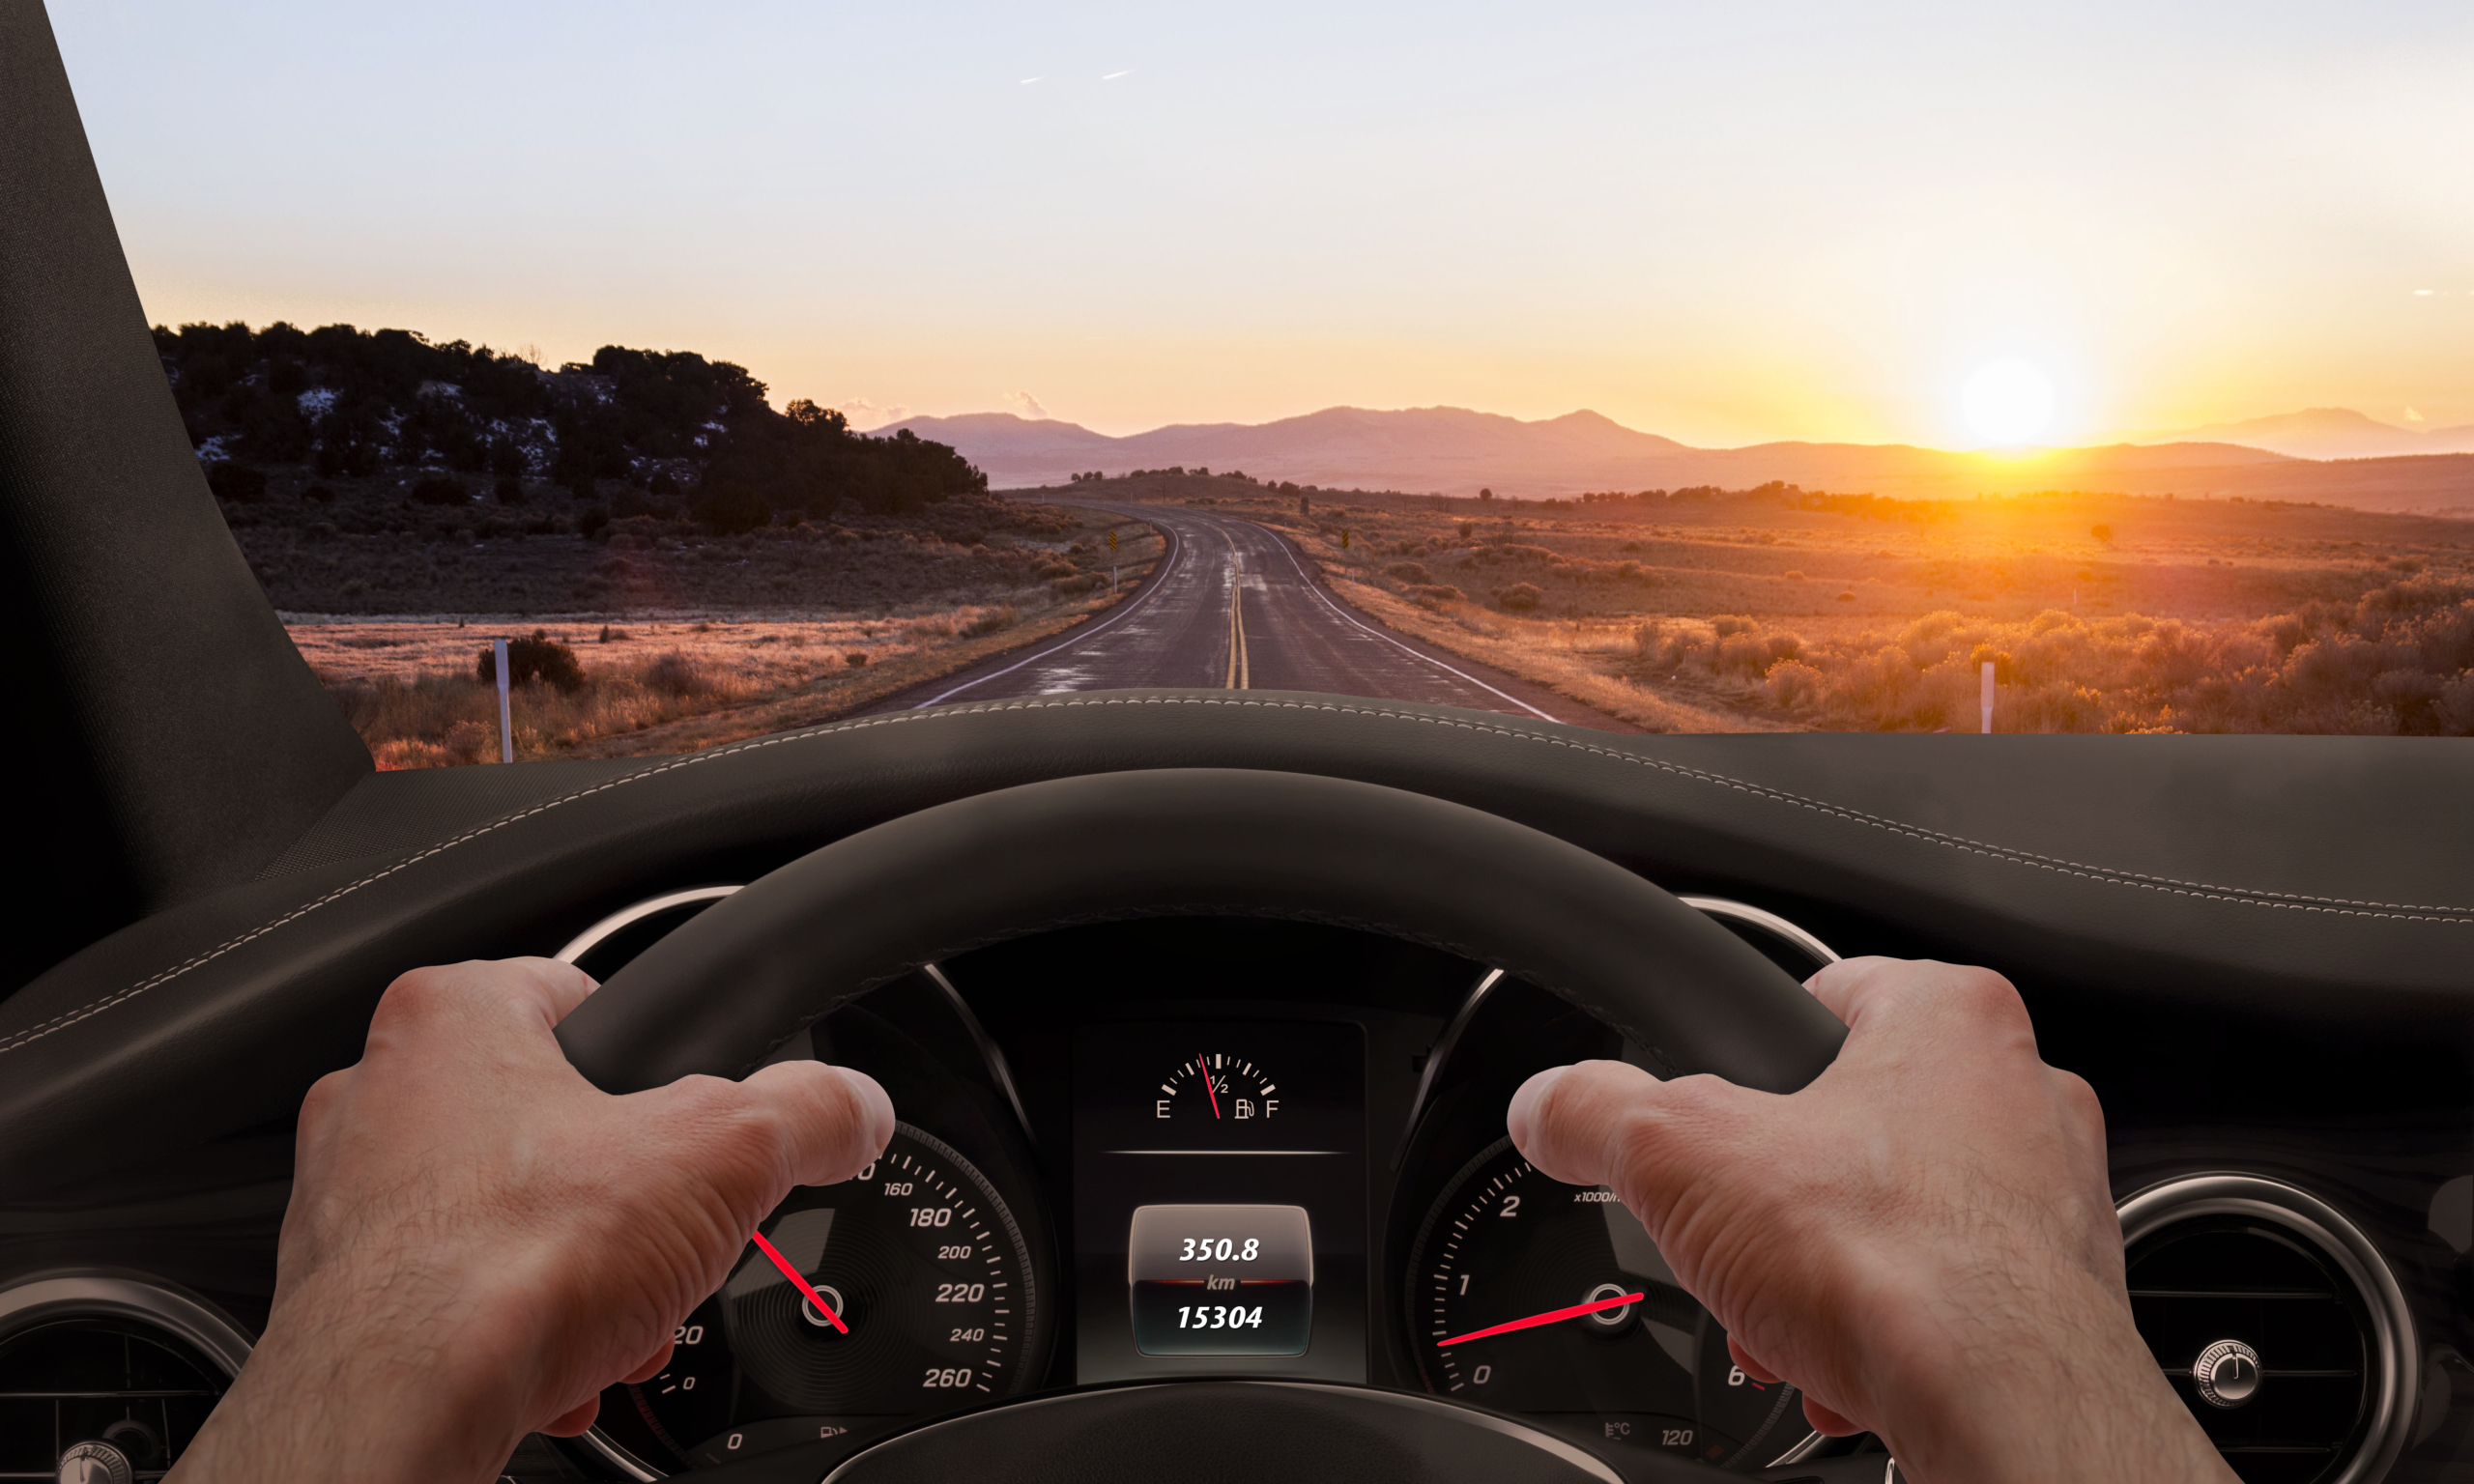 View of the sunset on the road from the driver angle while hands on the wheel.